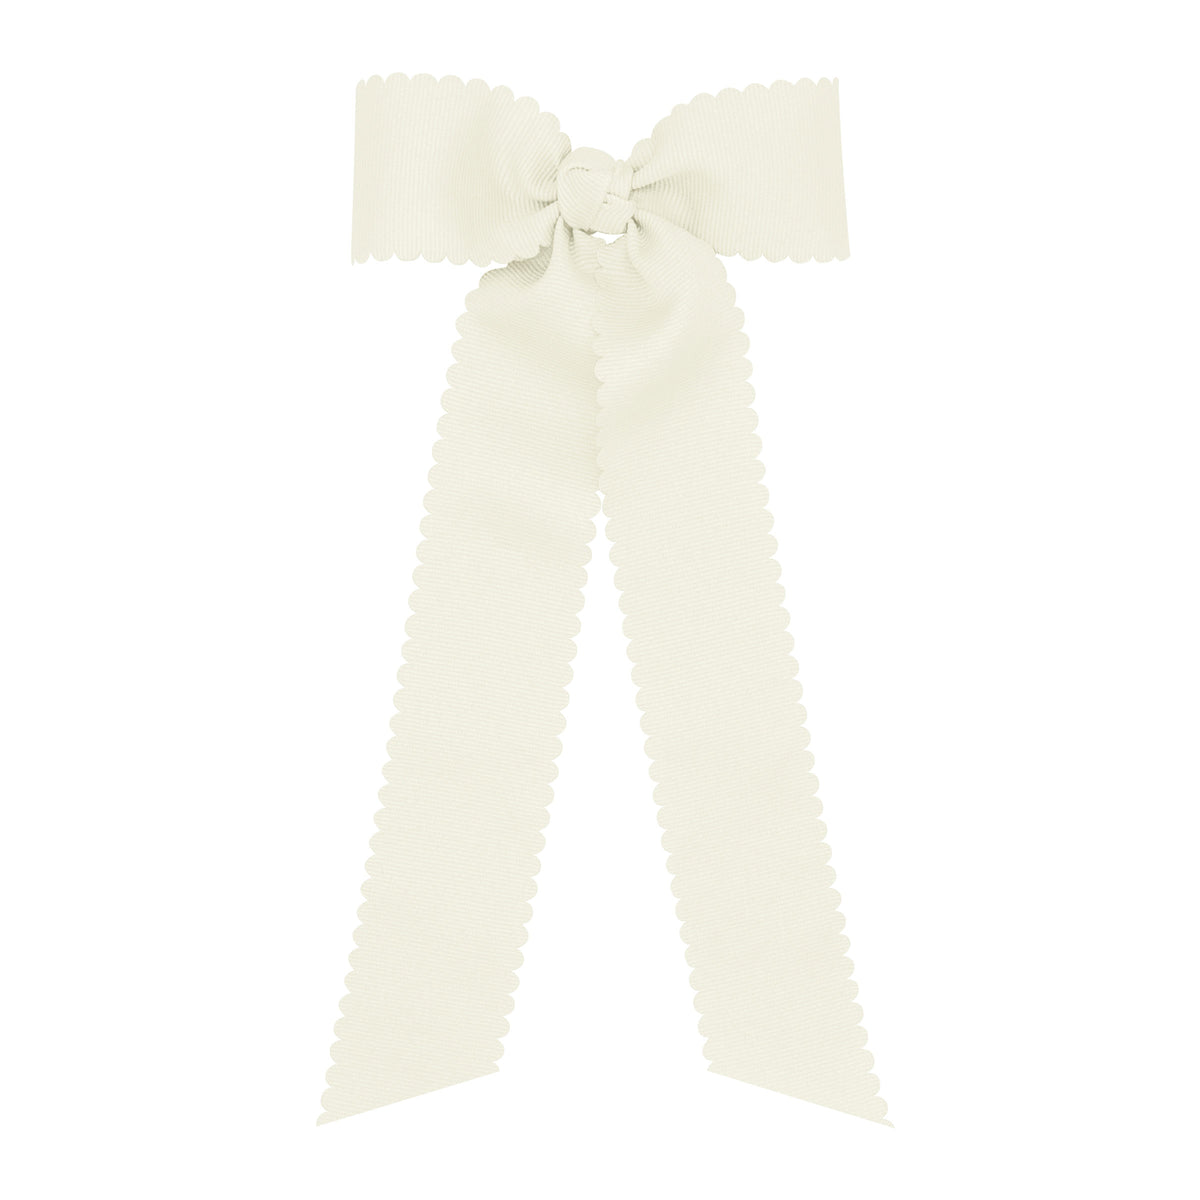 Medium Grosgrain Bowtie with Scalloped Edge and Streamer Tails